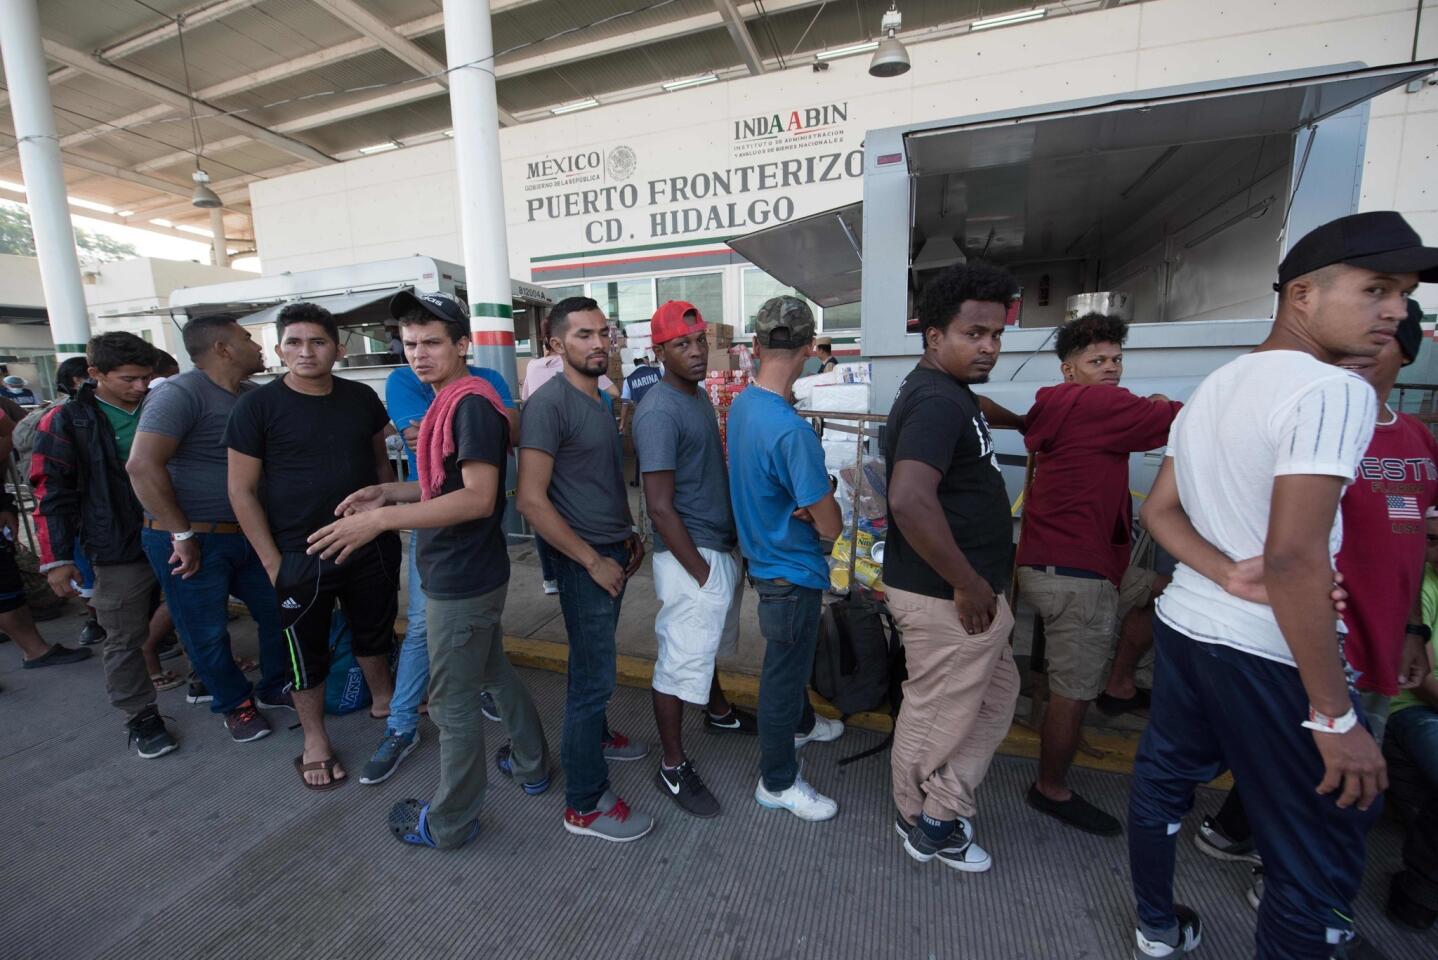 Central American migrants heading to the United States wait for immigration officials to give them a humanitarian visitor card to continue on their journey, in Ciudad Hidalgo, Mexico.